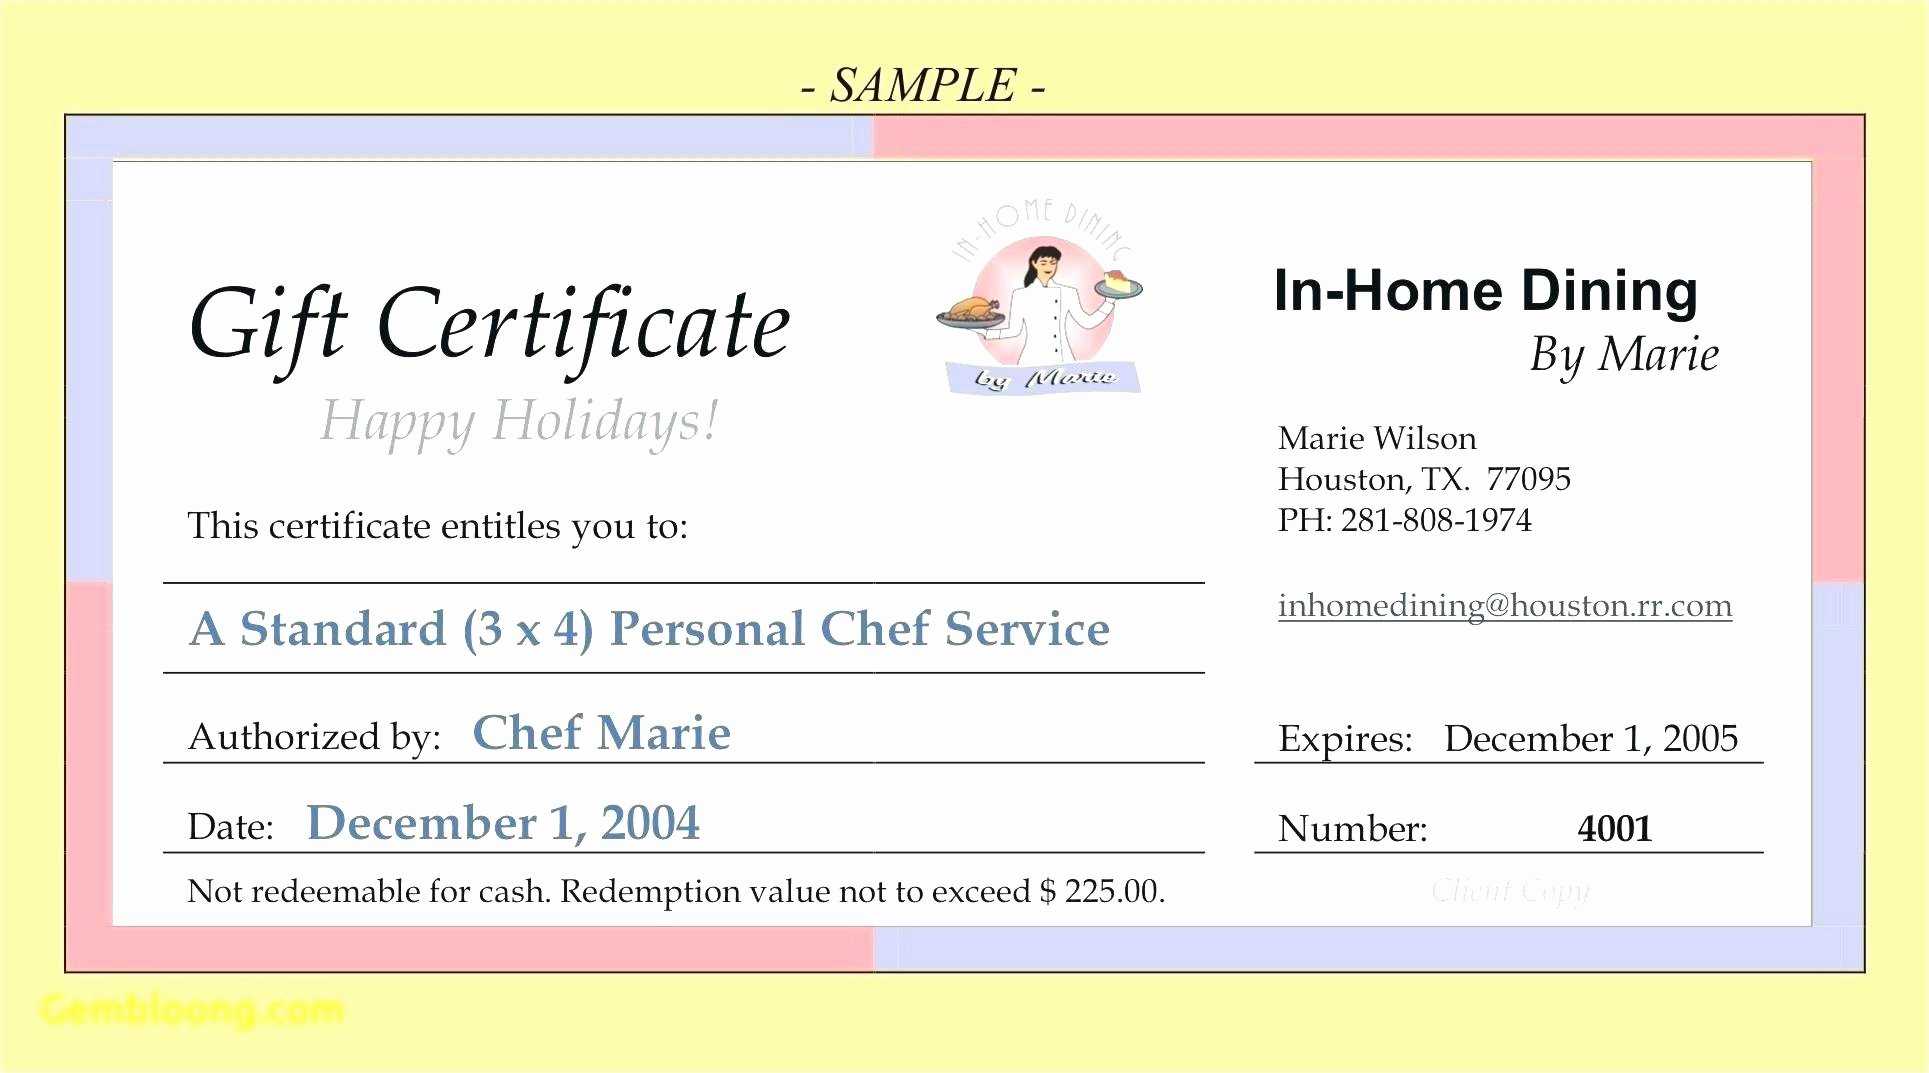 30 The Bearer Of This Certificate Is Entitled To Template With This Certificate Entitles The Bearer To Template